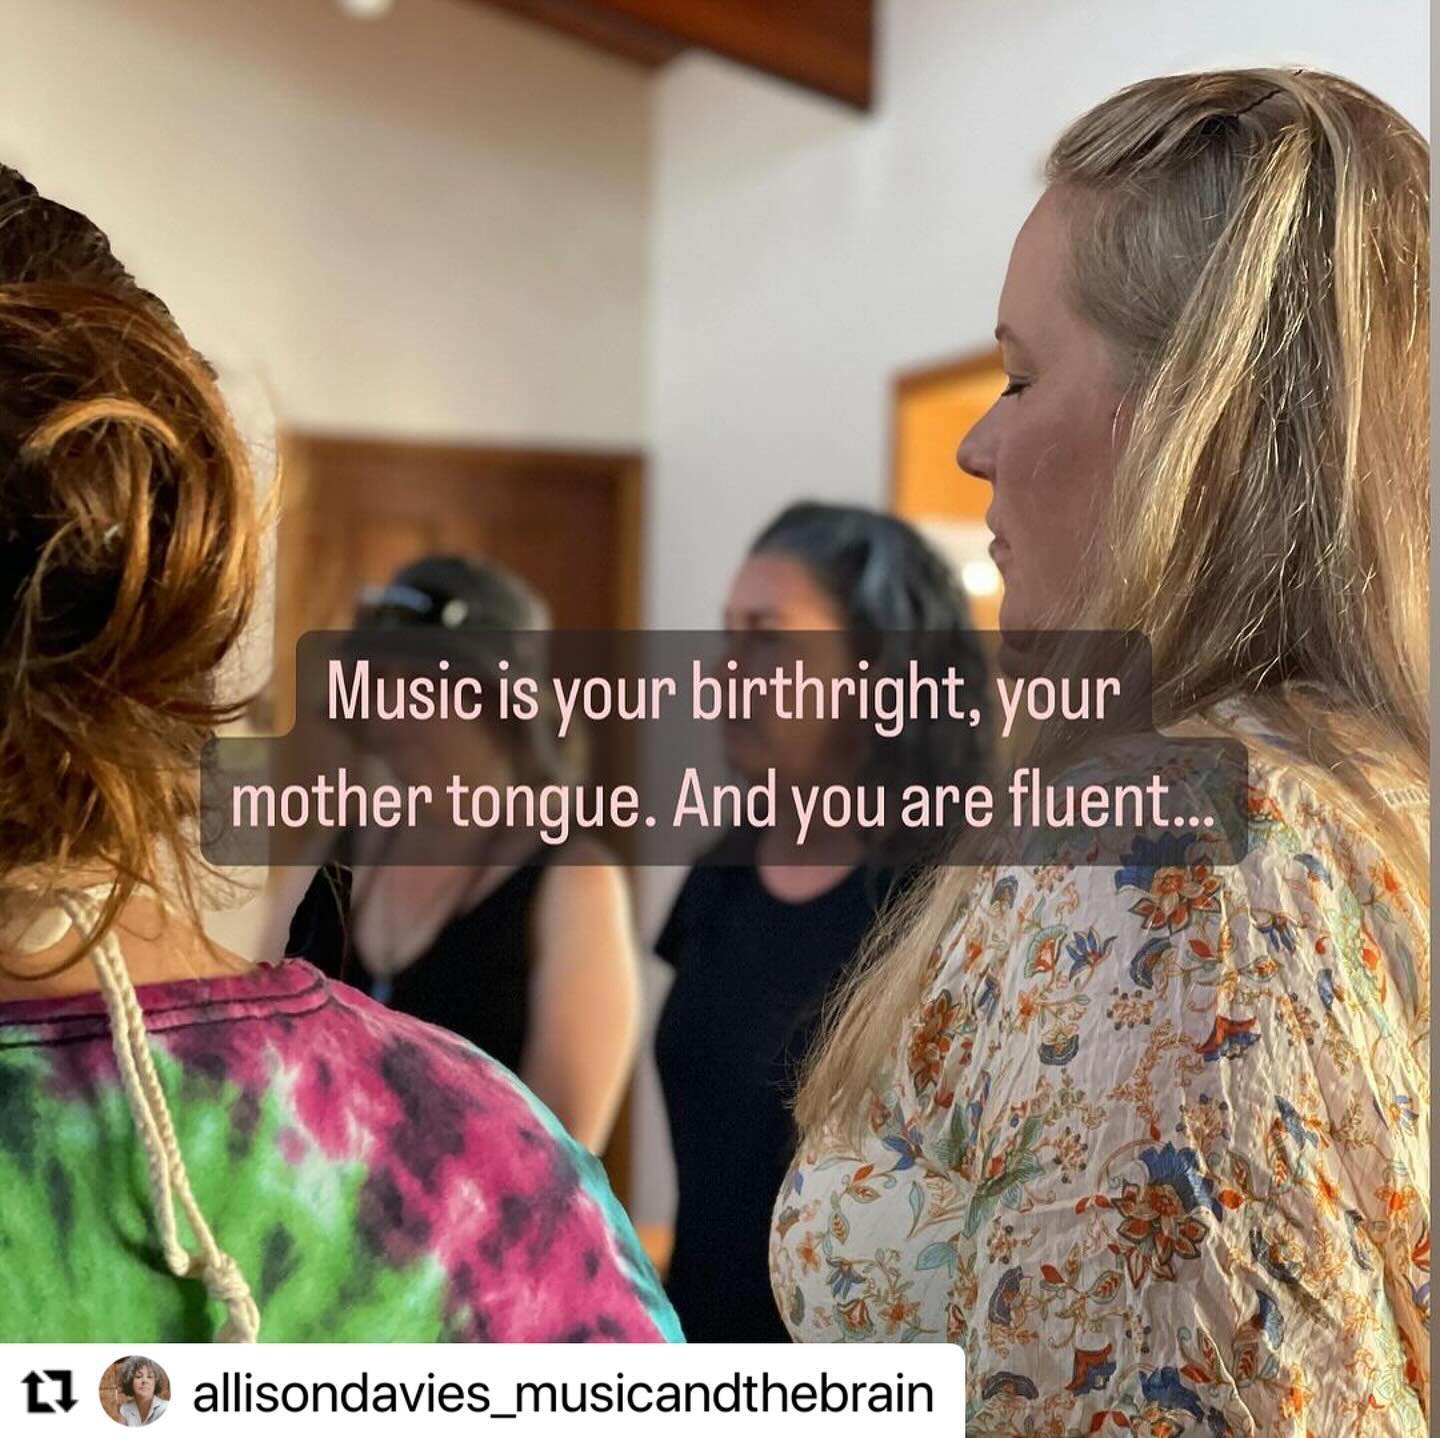 Agree 💯 with this!! @allisondavies_musicandthebrain with @use.repost
・・・
All throughout human history music was passed on through generations, taught by elders, traditional music making, community music making, ritual music making, a part of everyon